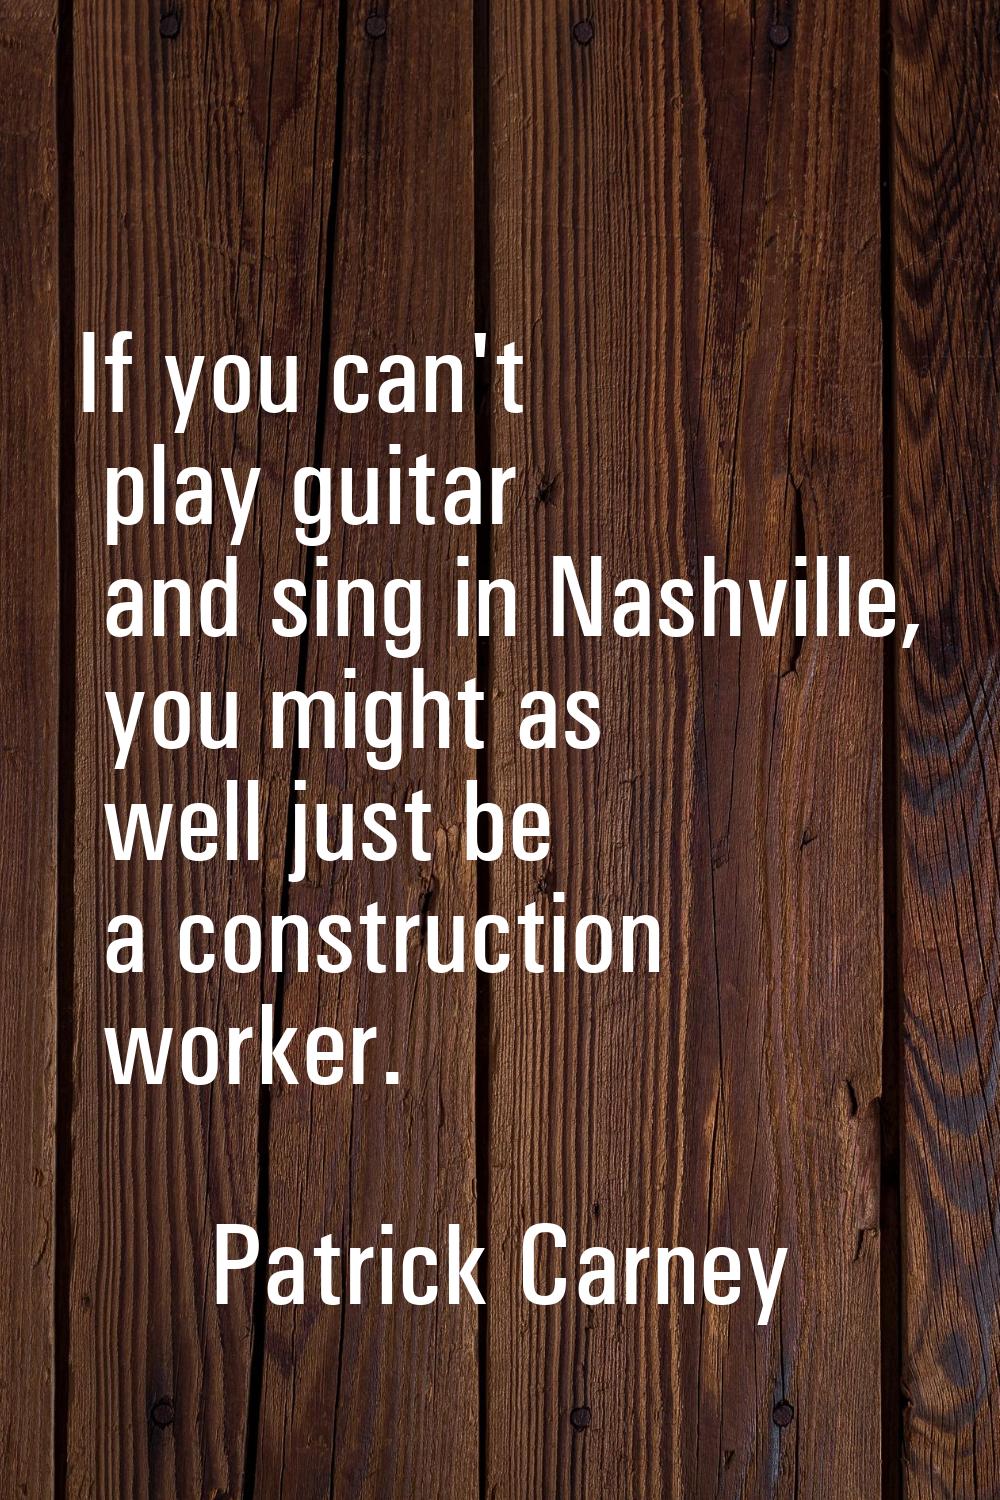 If you can't play guitar and sing in Nashville, you might as well just be a construction worker.